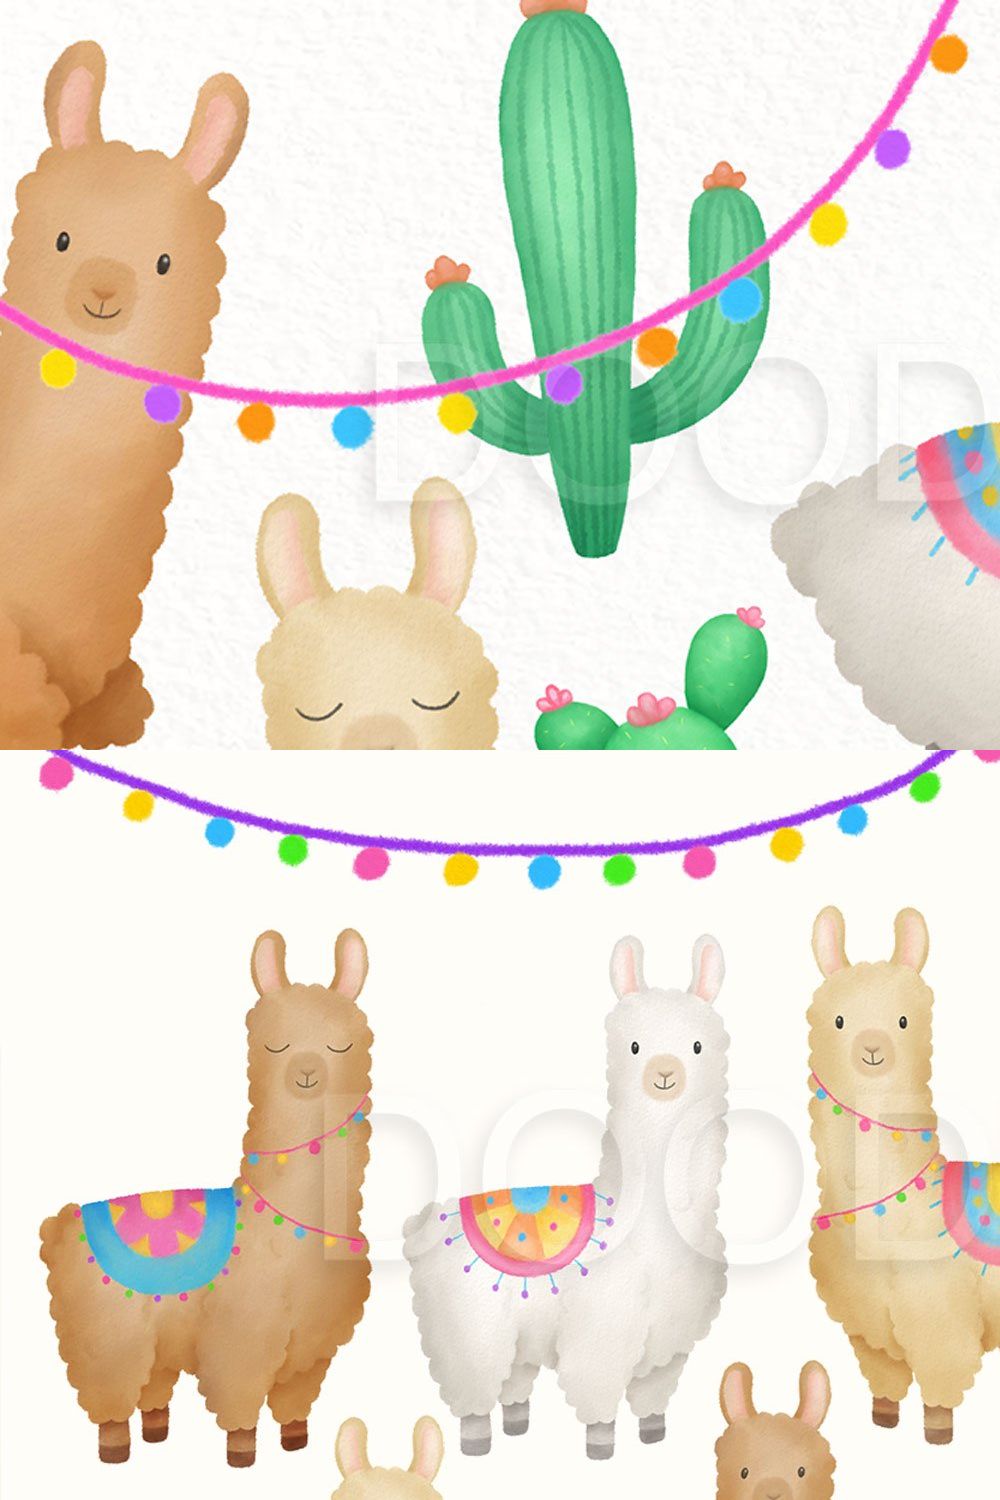 Llama and Alpacas Illustrations pinterest preview image.